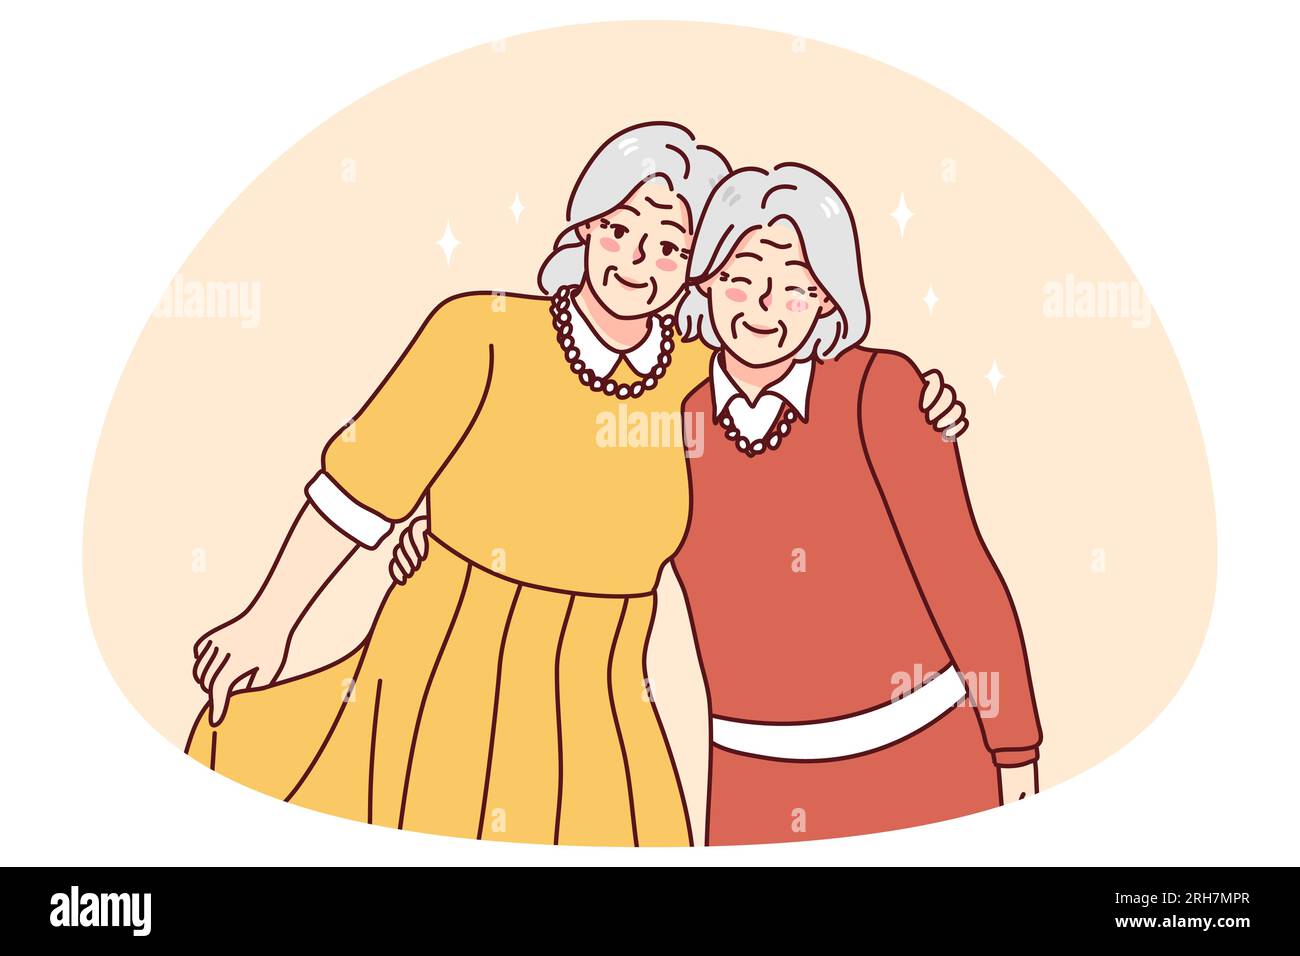 Happy mature grey-haired women hugging enjoying lifelong friendship. Smiling elderly grandmothers embrace show unity and love. Aging concept. Vector illustration. Stock Vector